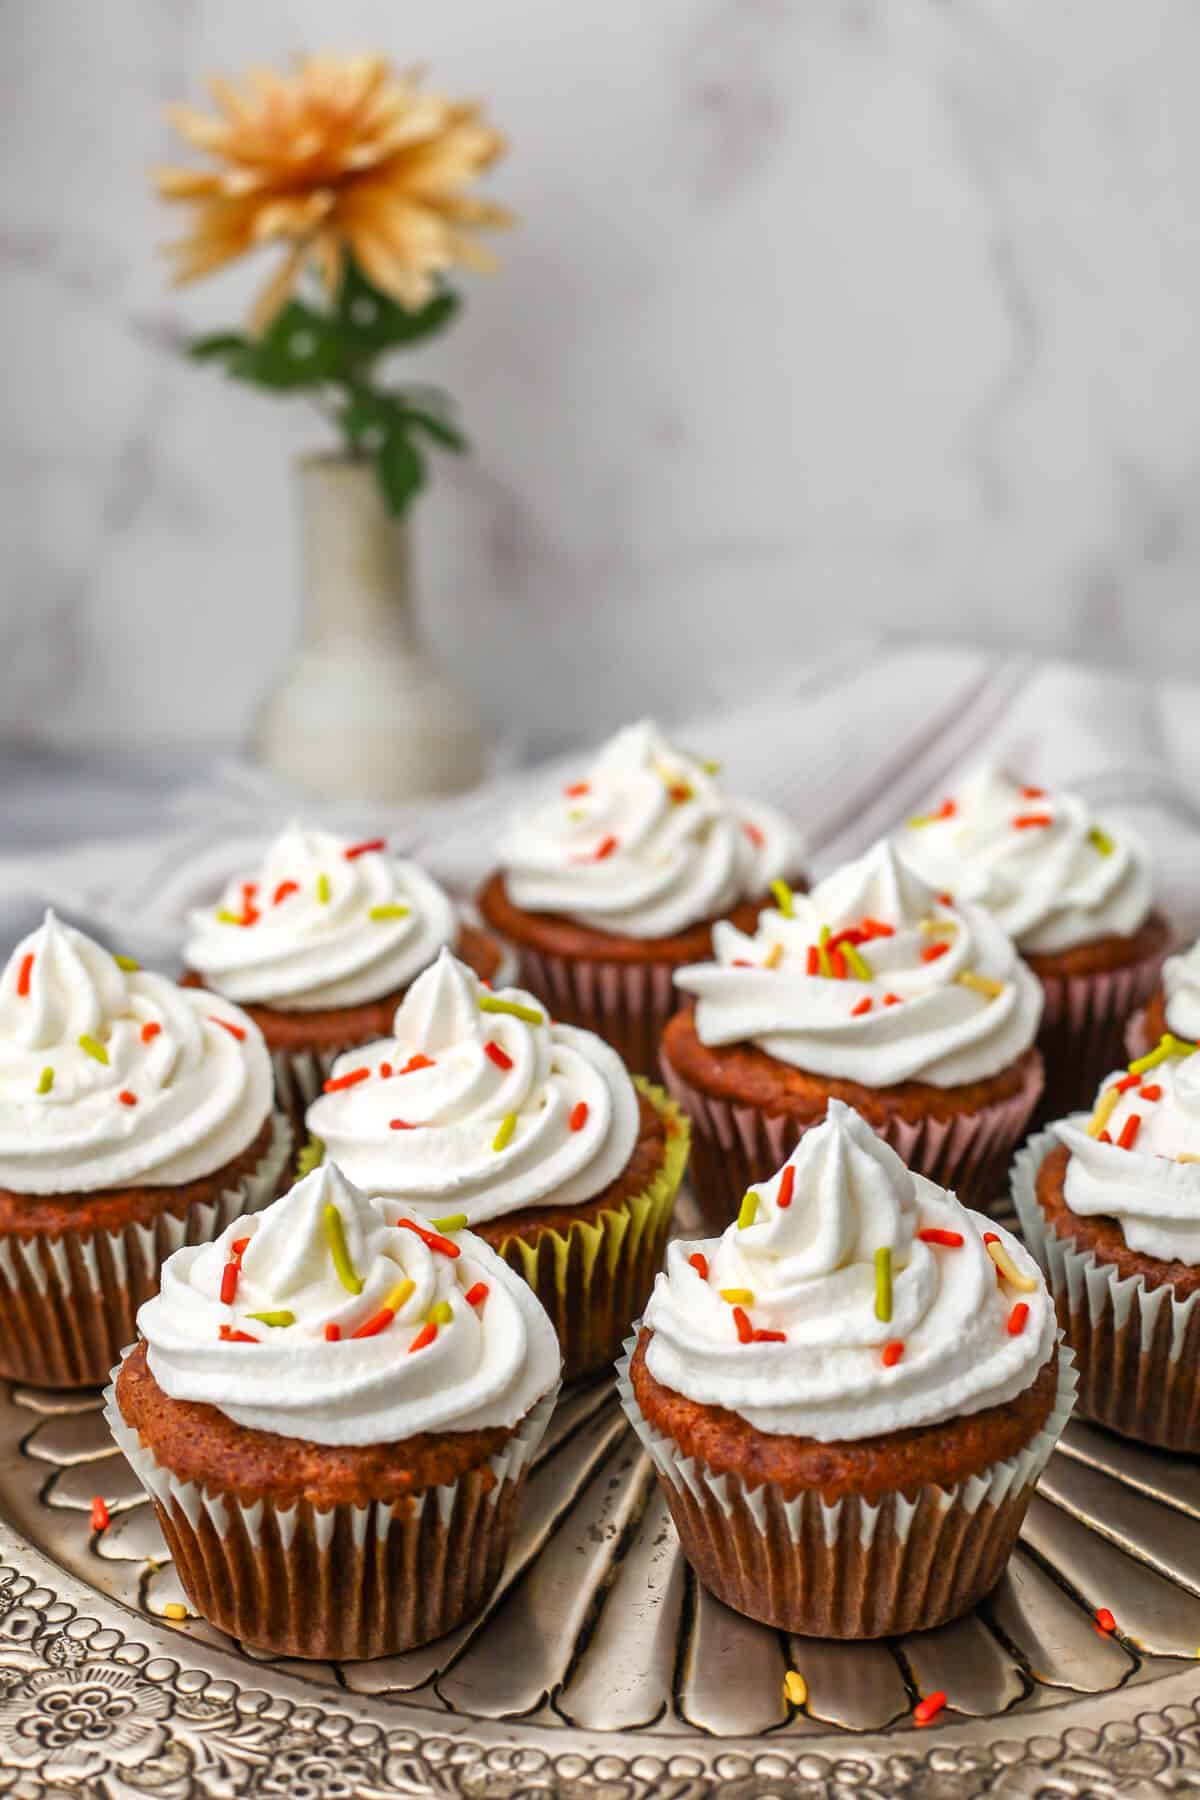 A platter full of vegan carrot cake muffins with cream cheese frosting and orange and green sprinkles with an orange flour behind them.